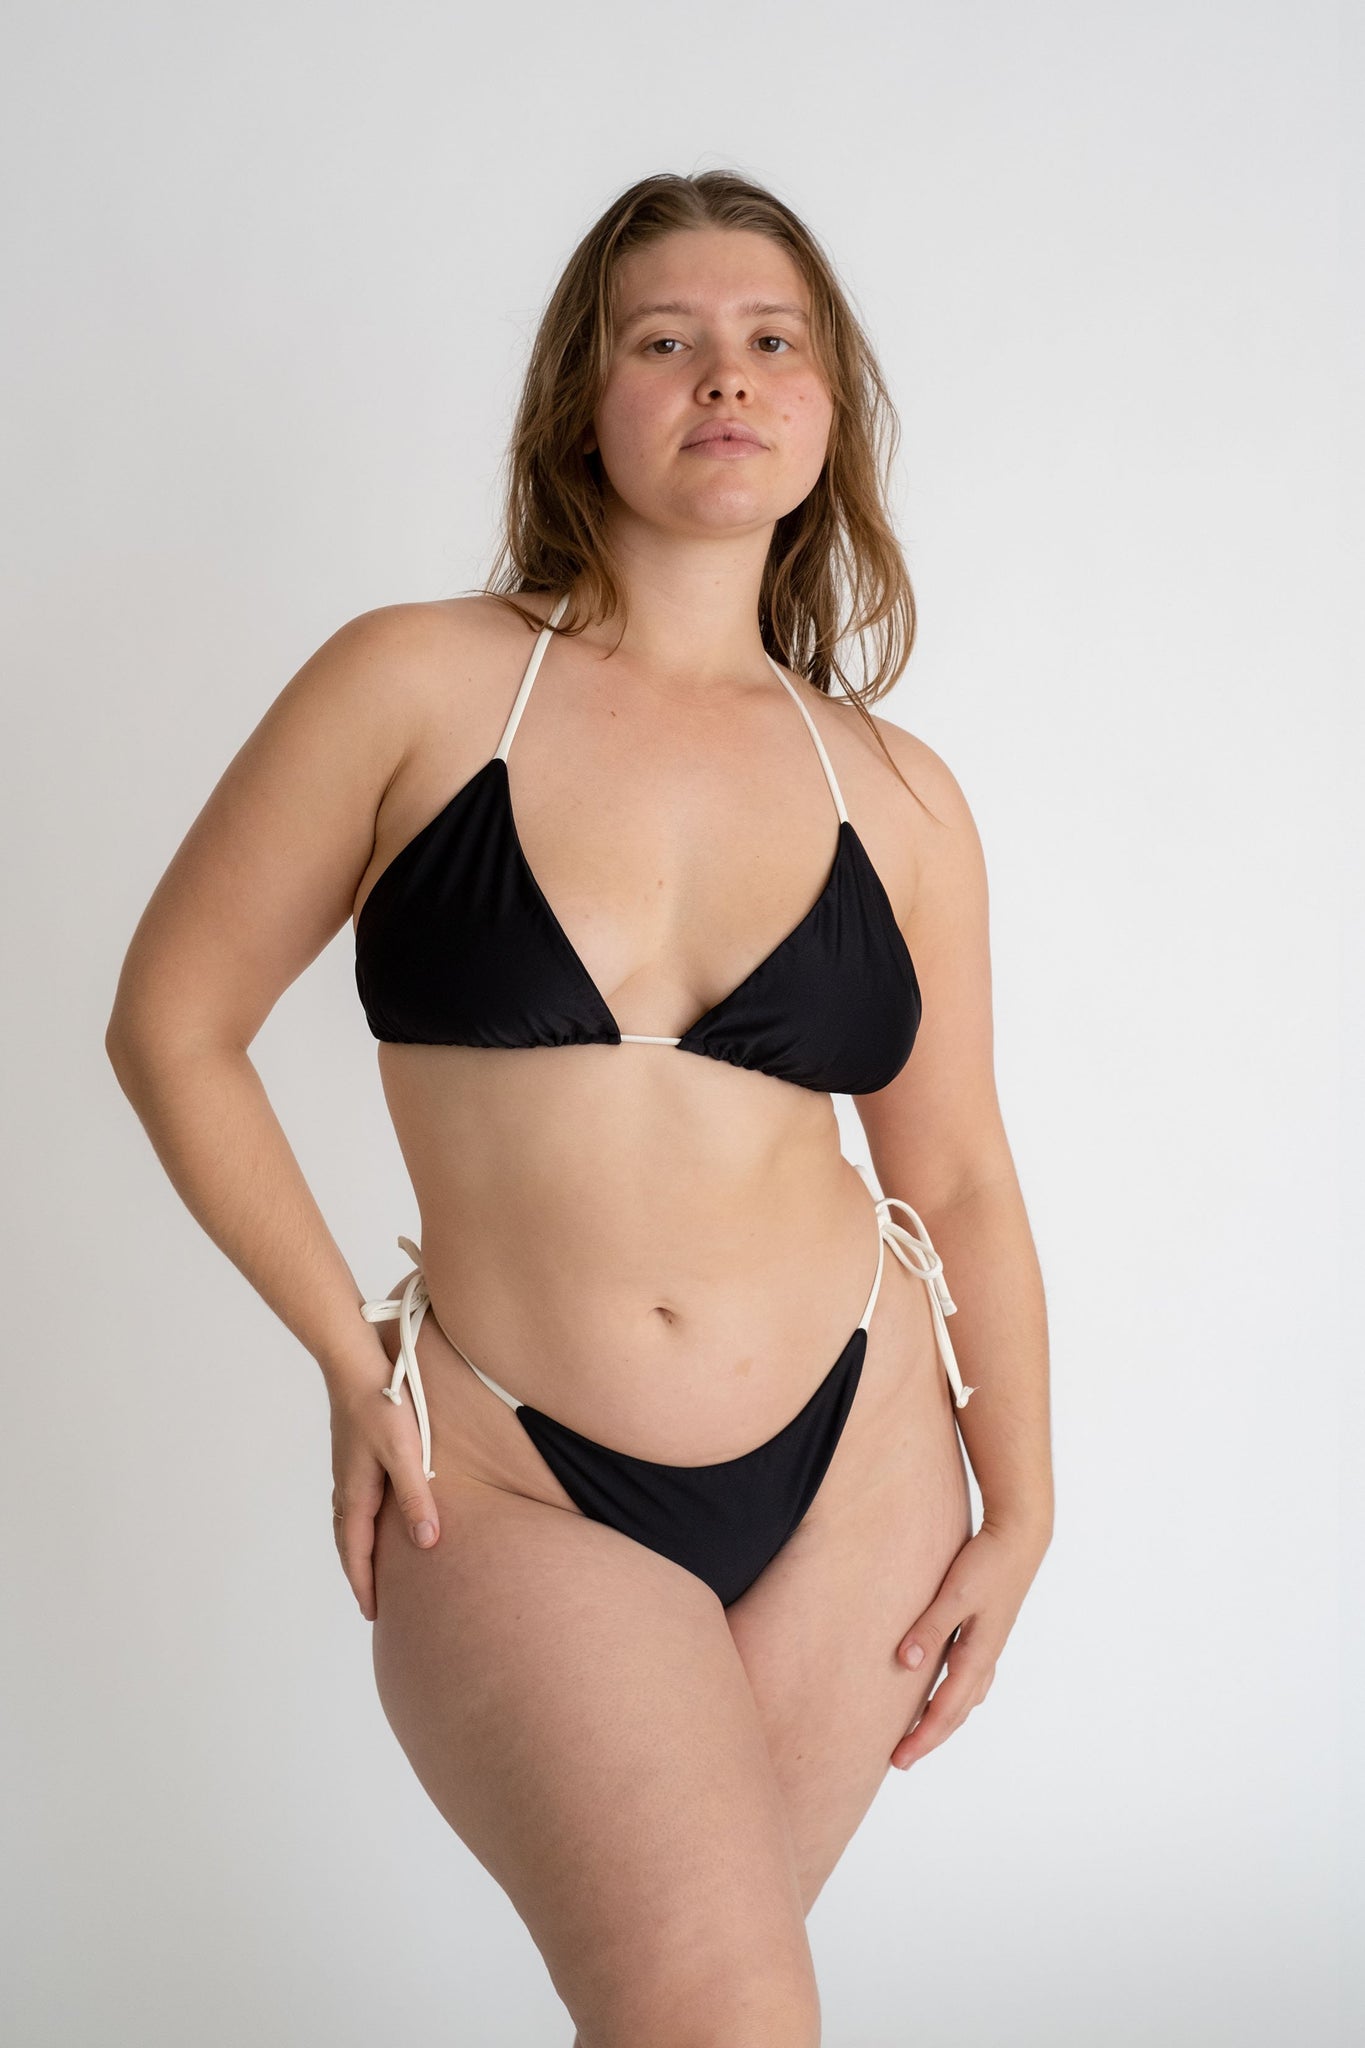 A woman standing with one hand on her hip wearing black triangle bikini bottoms with white string ties and a matching black triangle bikini top with adjustable white strings.